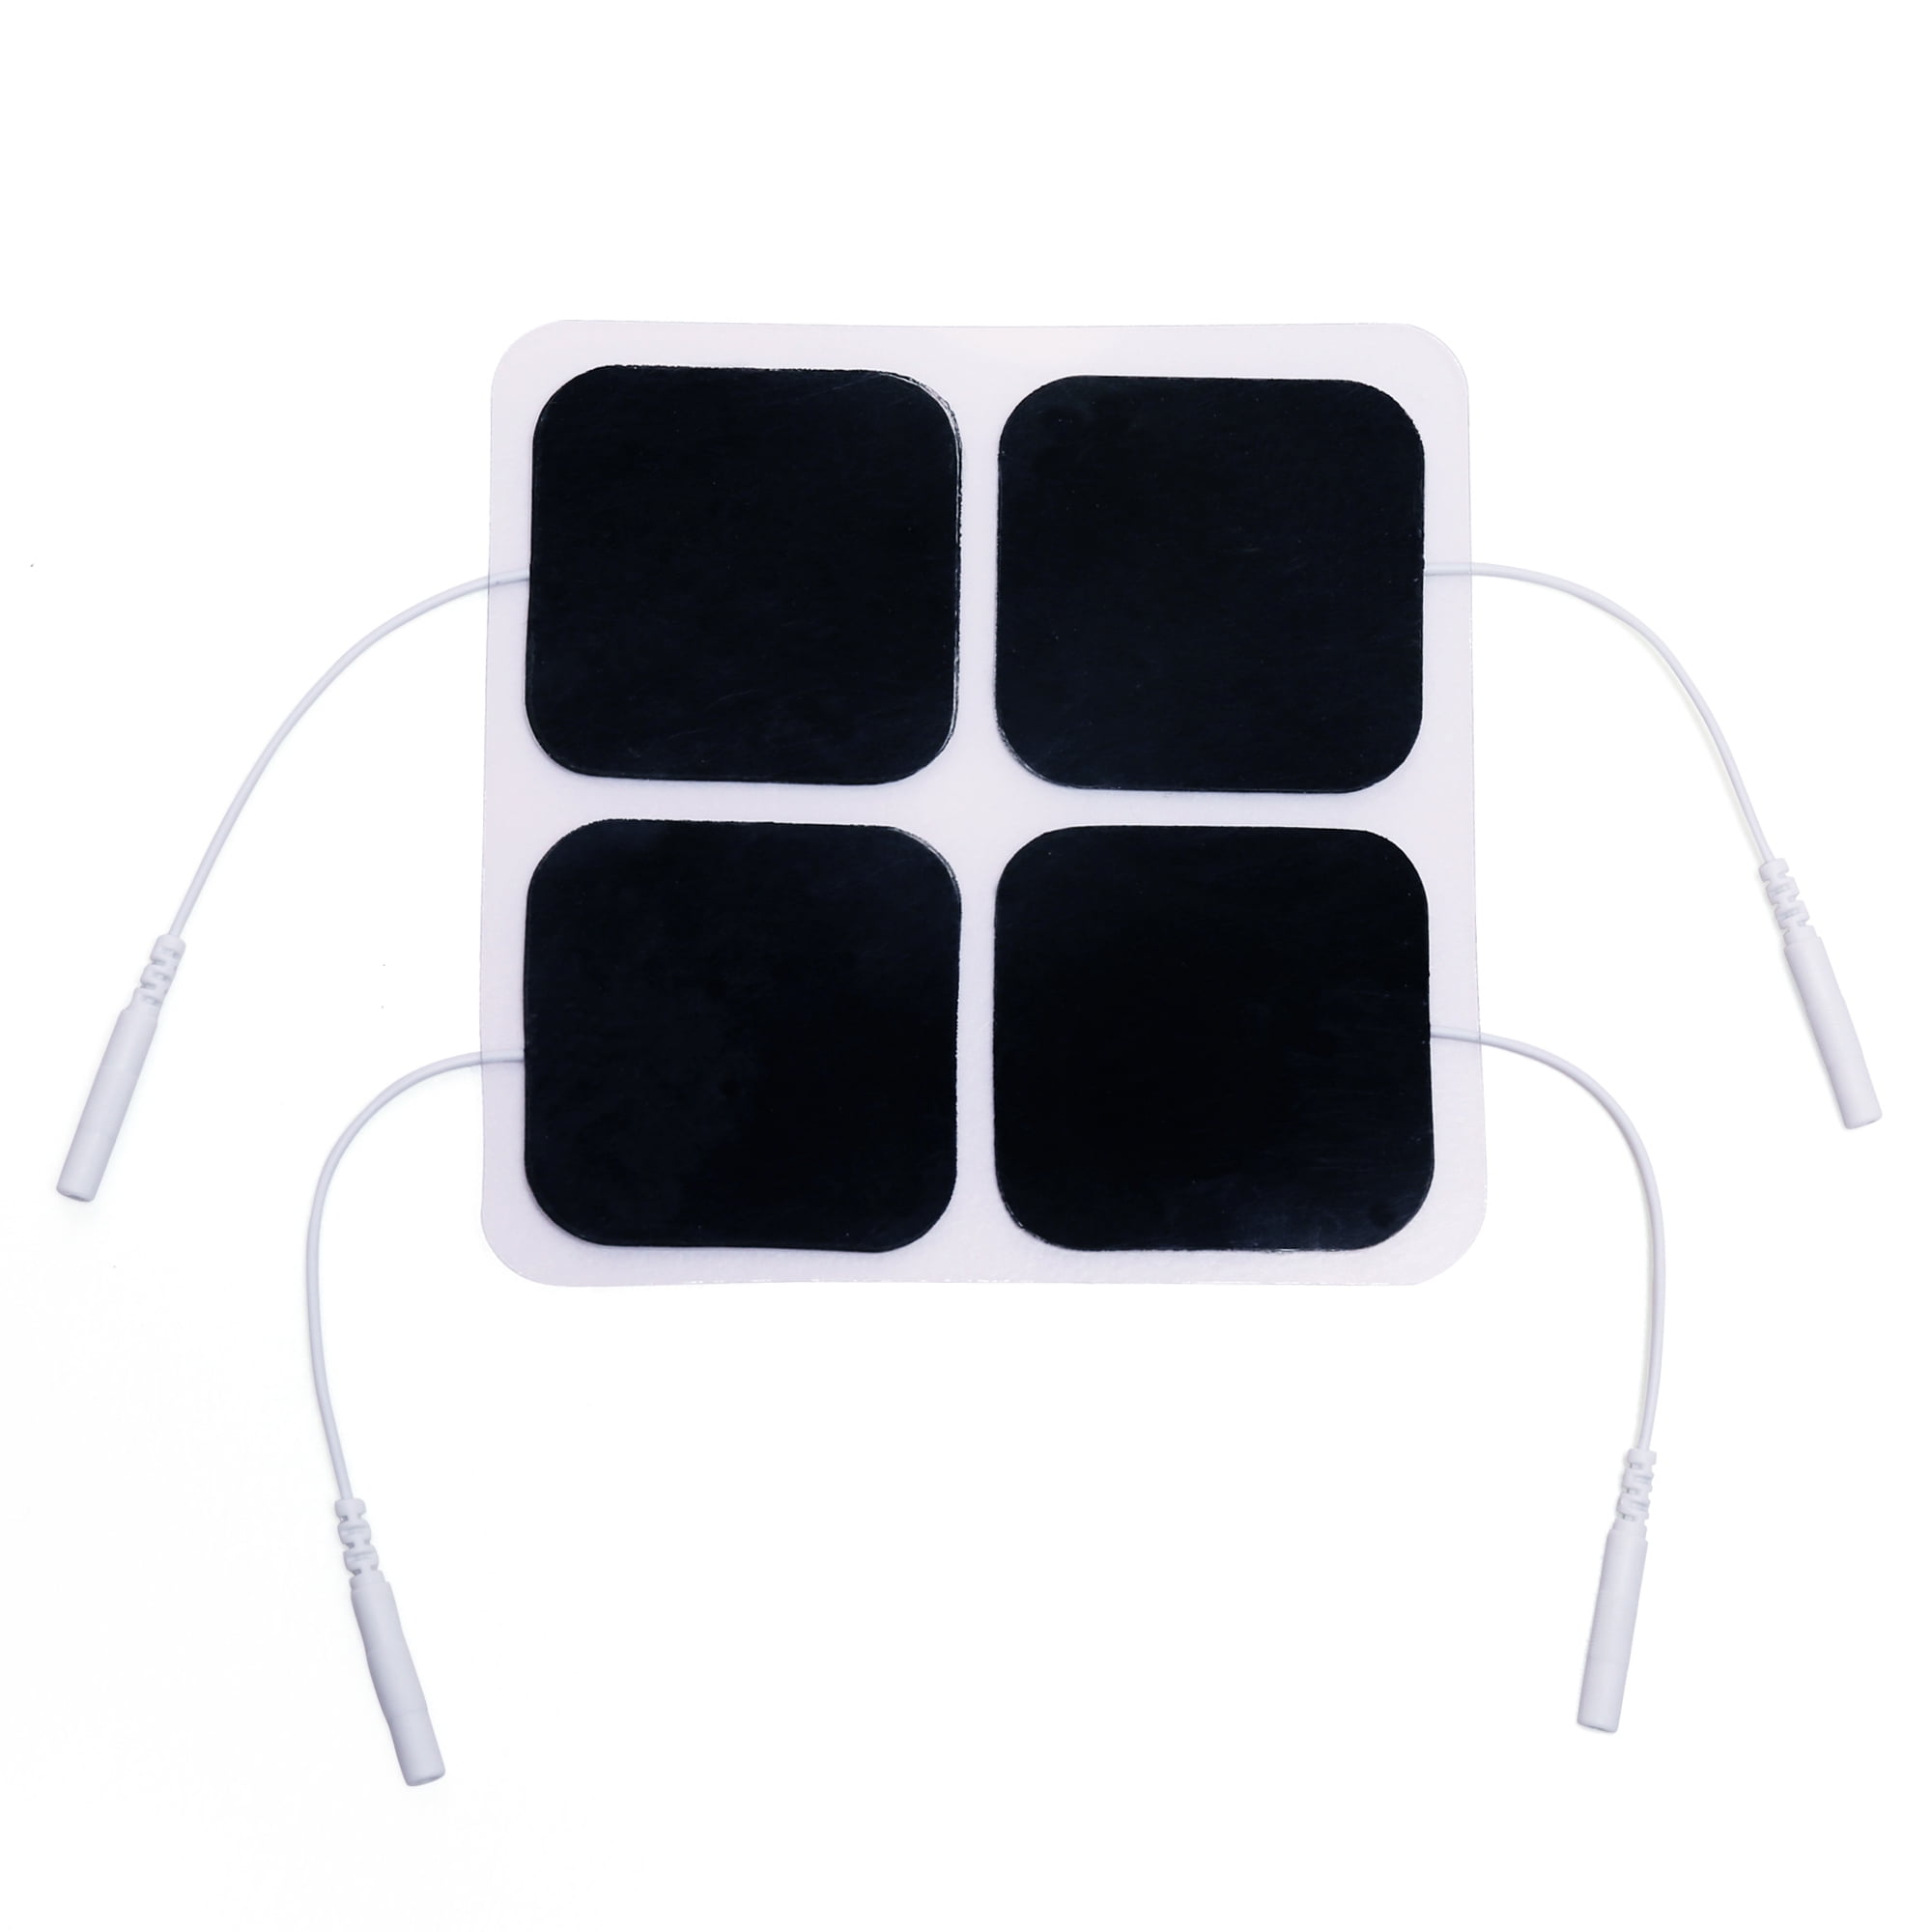 LotFancy 10 Pcs TENS Unit Replacement Pads for Omron Standard Long Life  Pads, Snap Electrode Pads